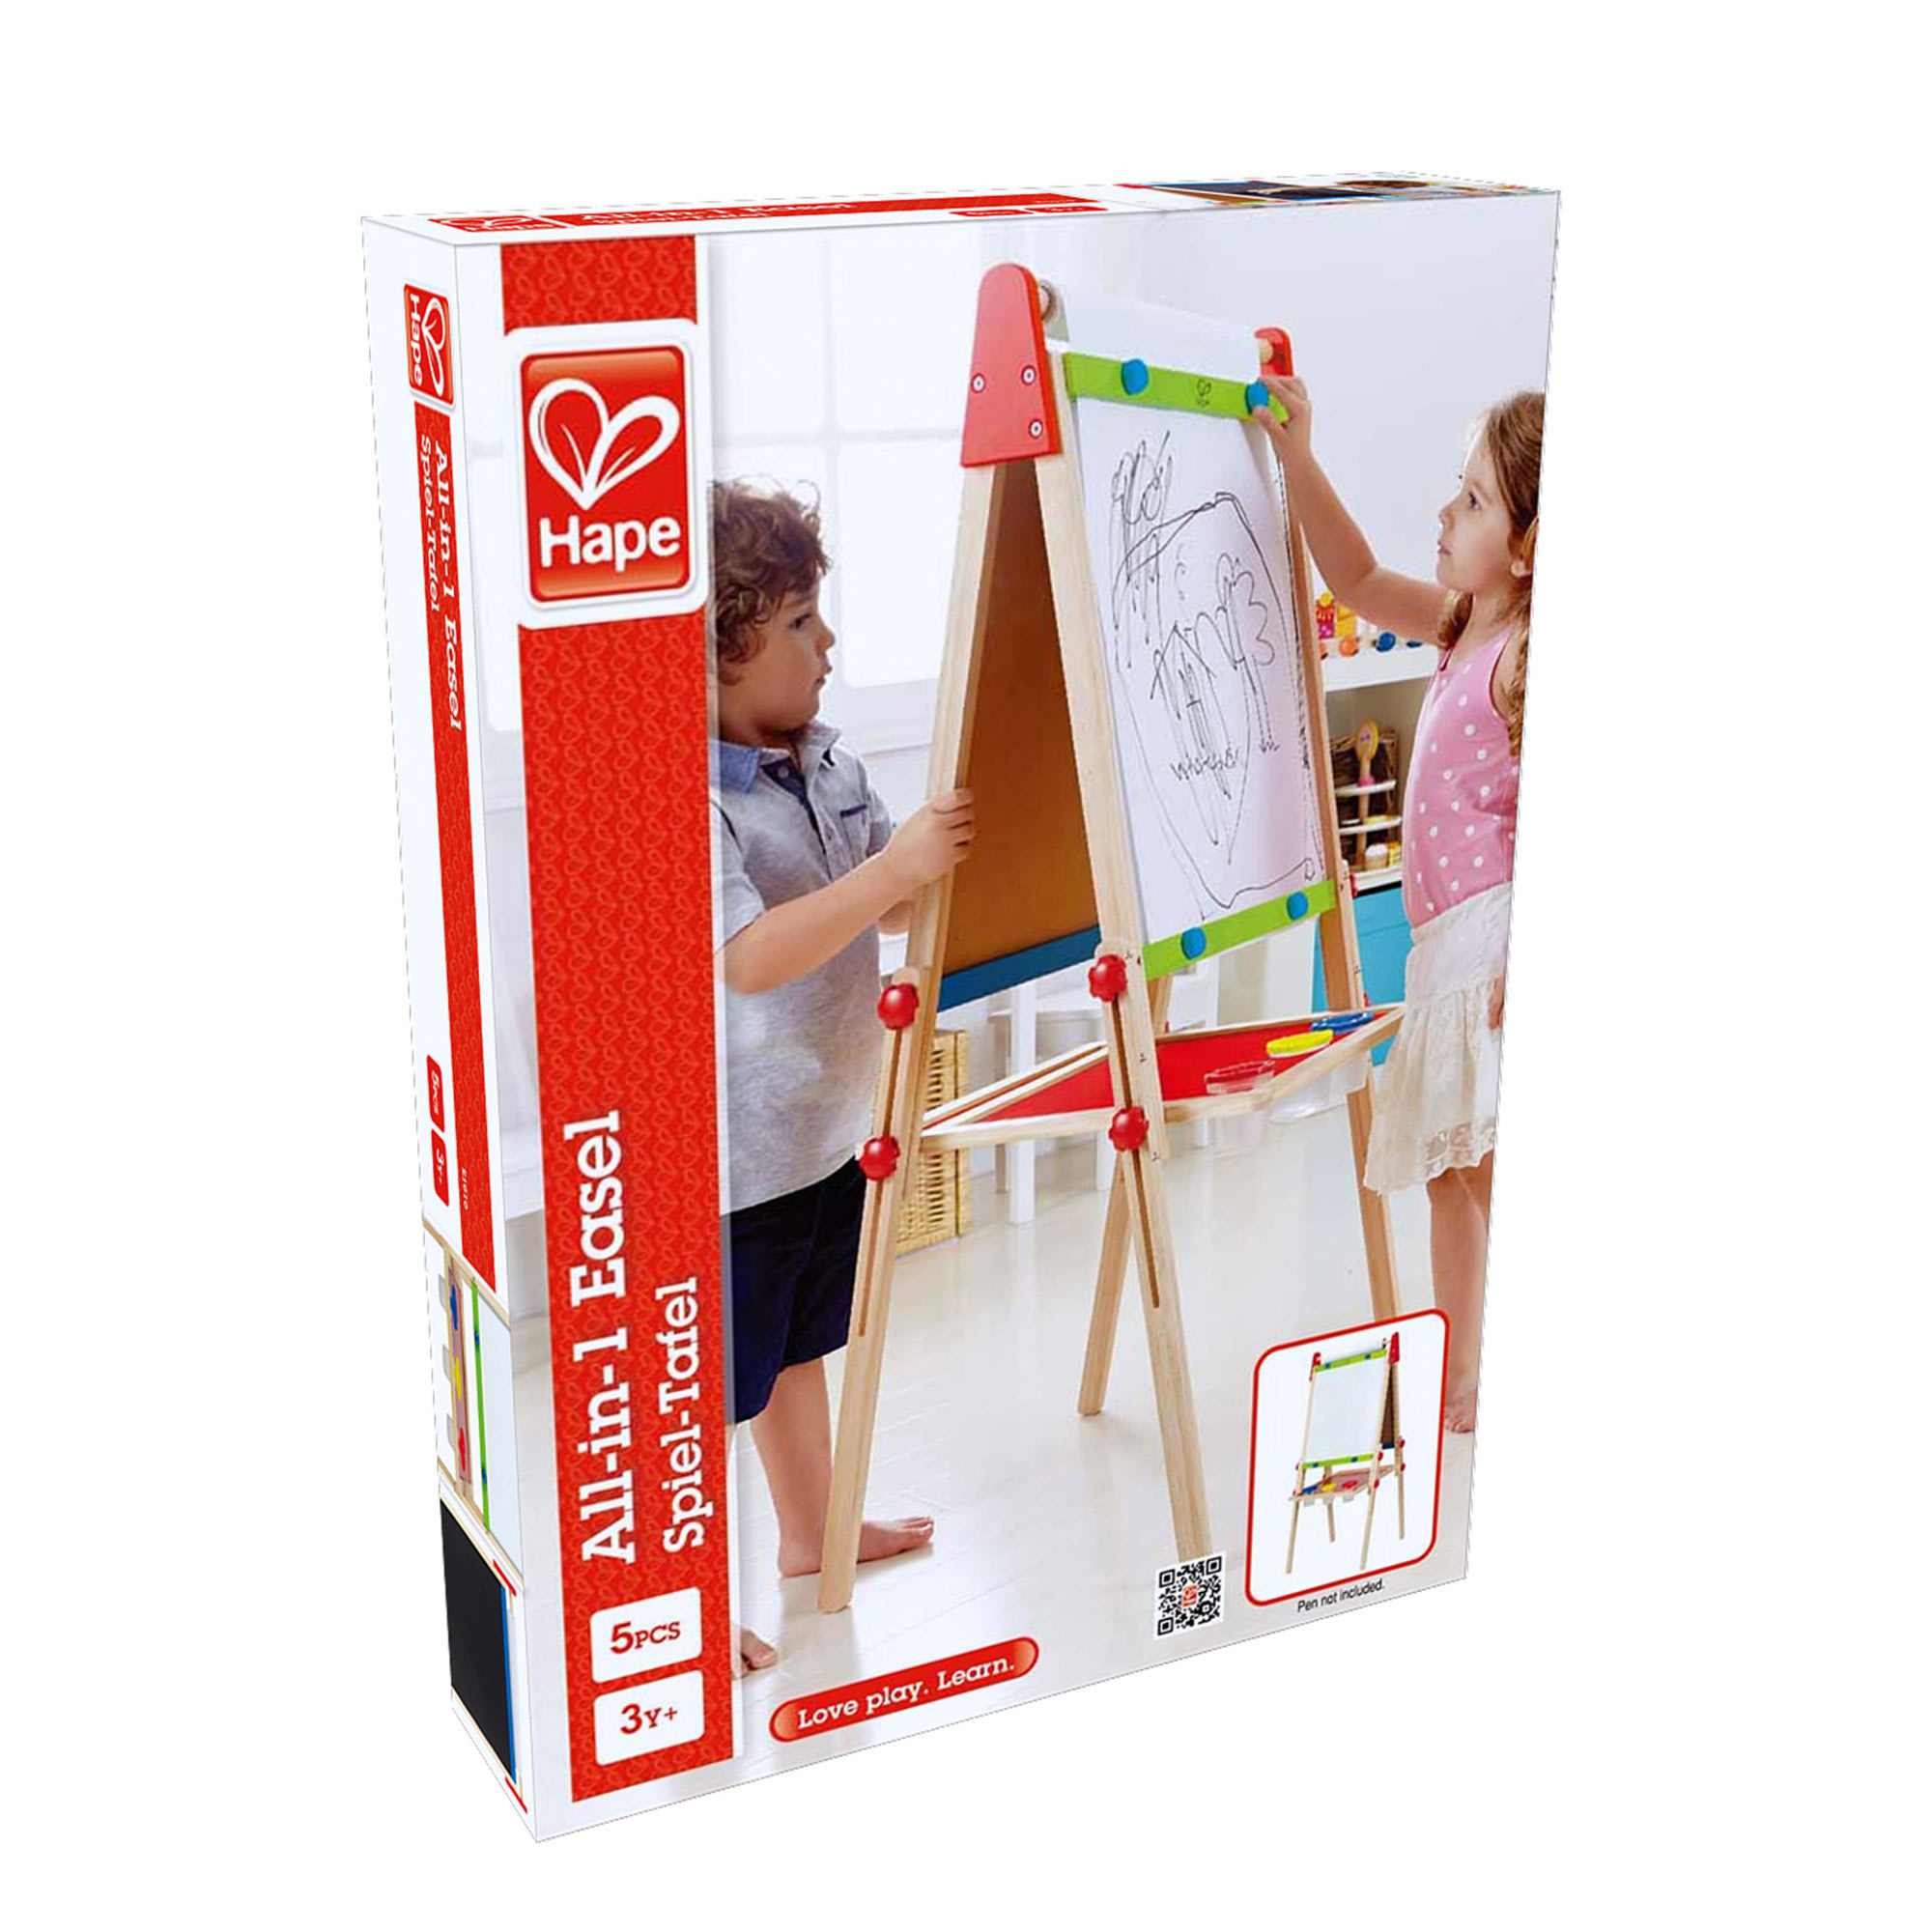 Hape All-in-One Double-Sided Art Easel w/ Paper Roll & Accessories, Blackboard & Magnetic Whiteboard - image 2 of 6